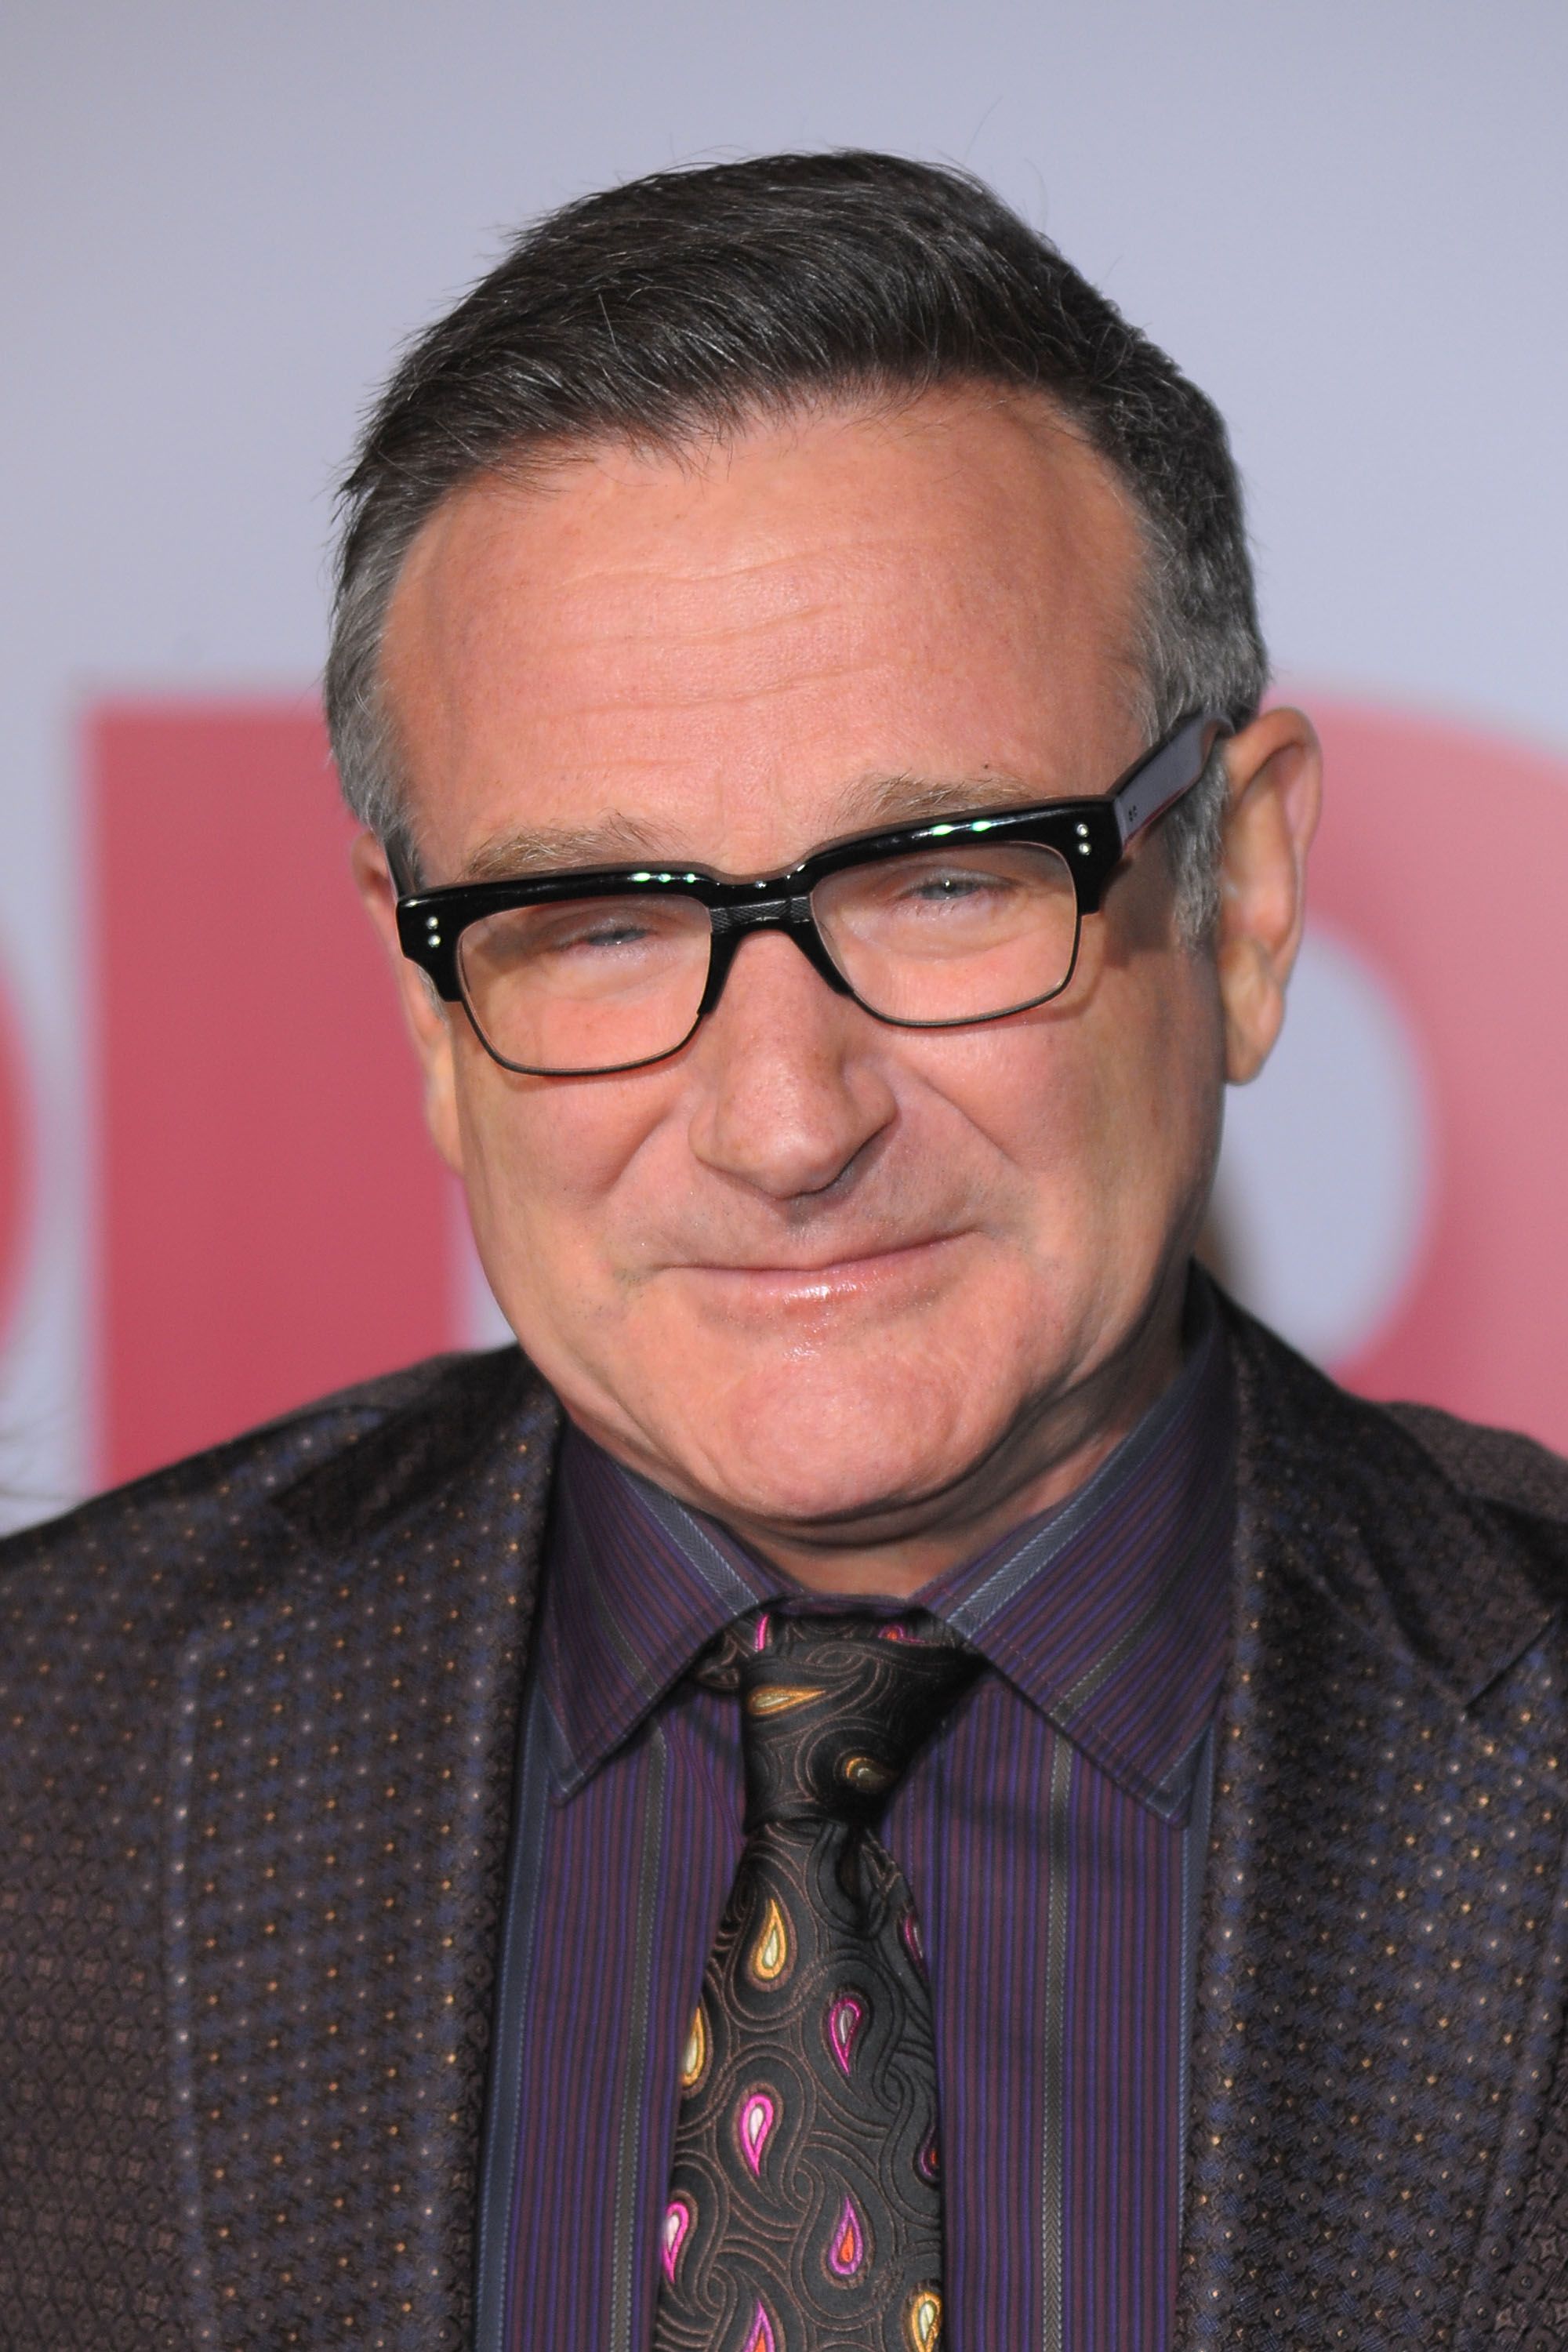 Robin Williams at the premiere of Walt Disney Pictures' 'Old Dogs' at the El Capitan Theatre on November 9, 2009 | Photo: Getty Images